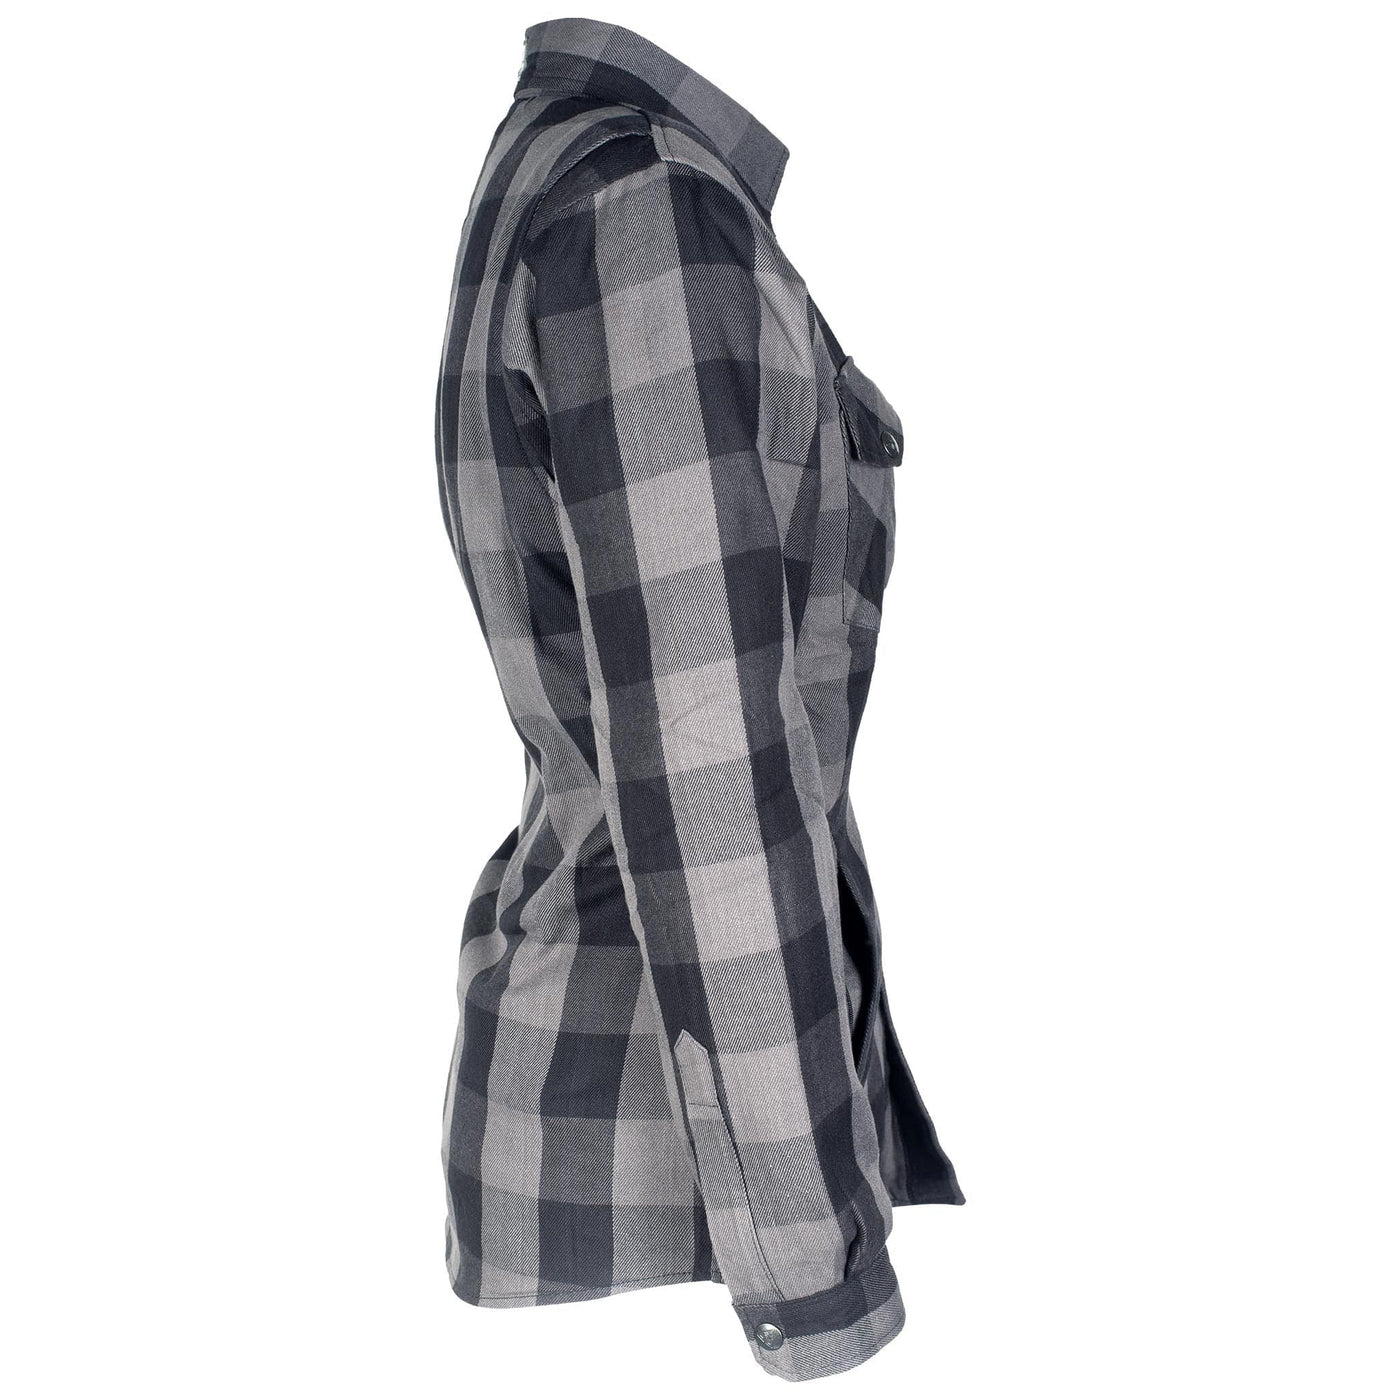 Protective Flannel Shirt with Pads for Women - Grey Checkered